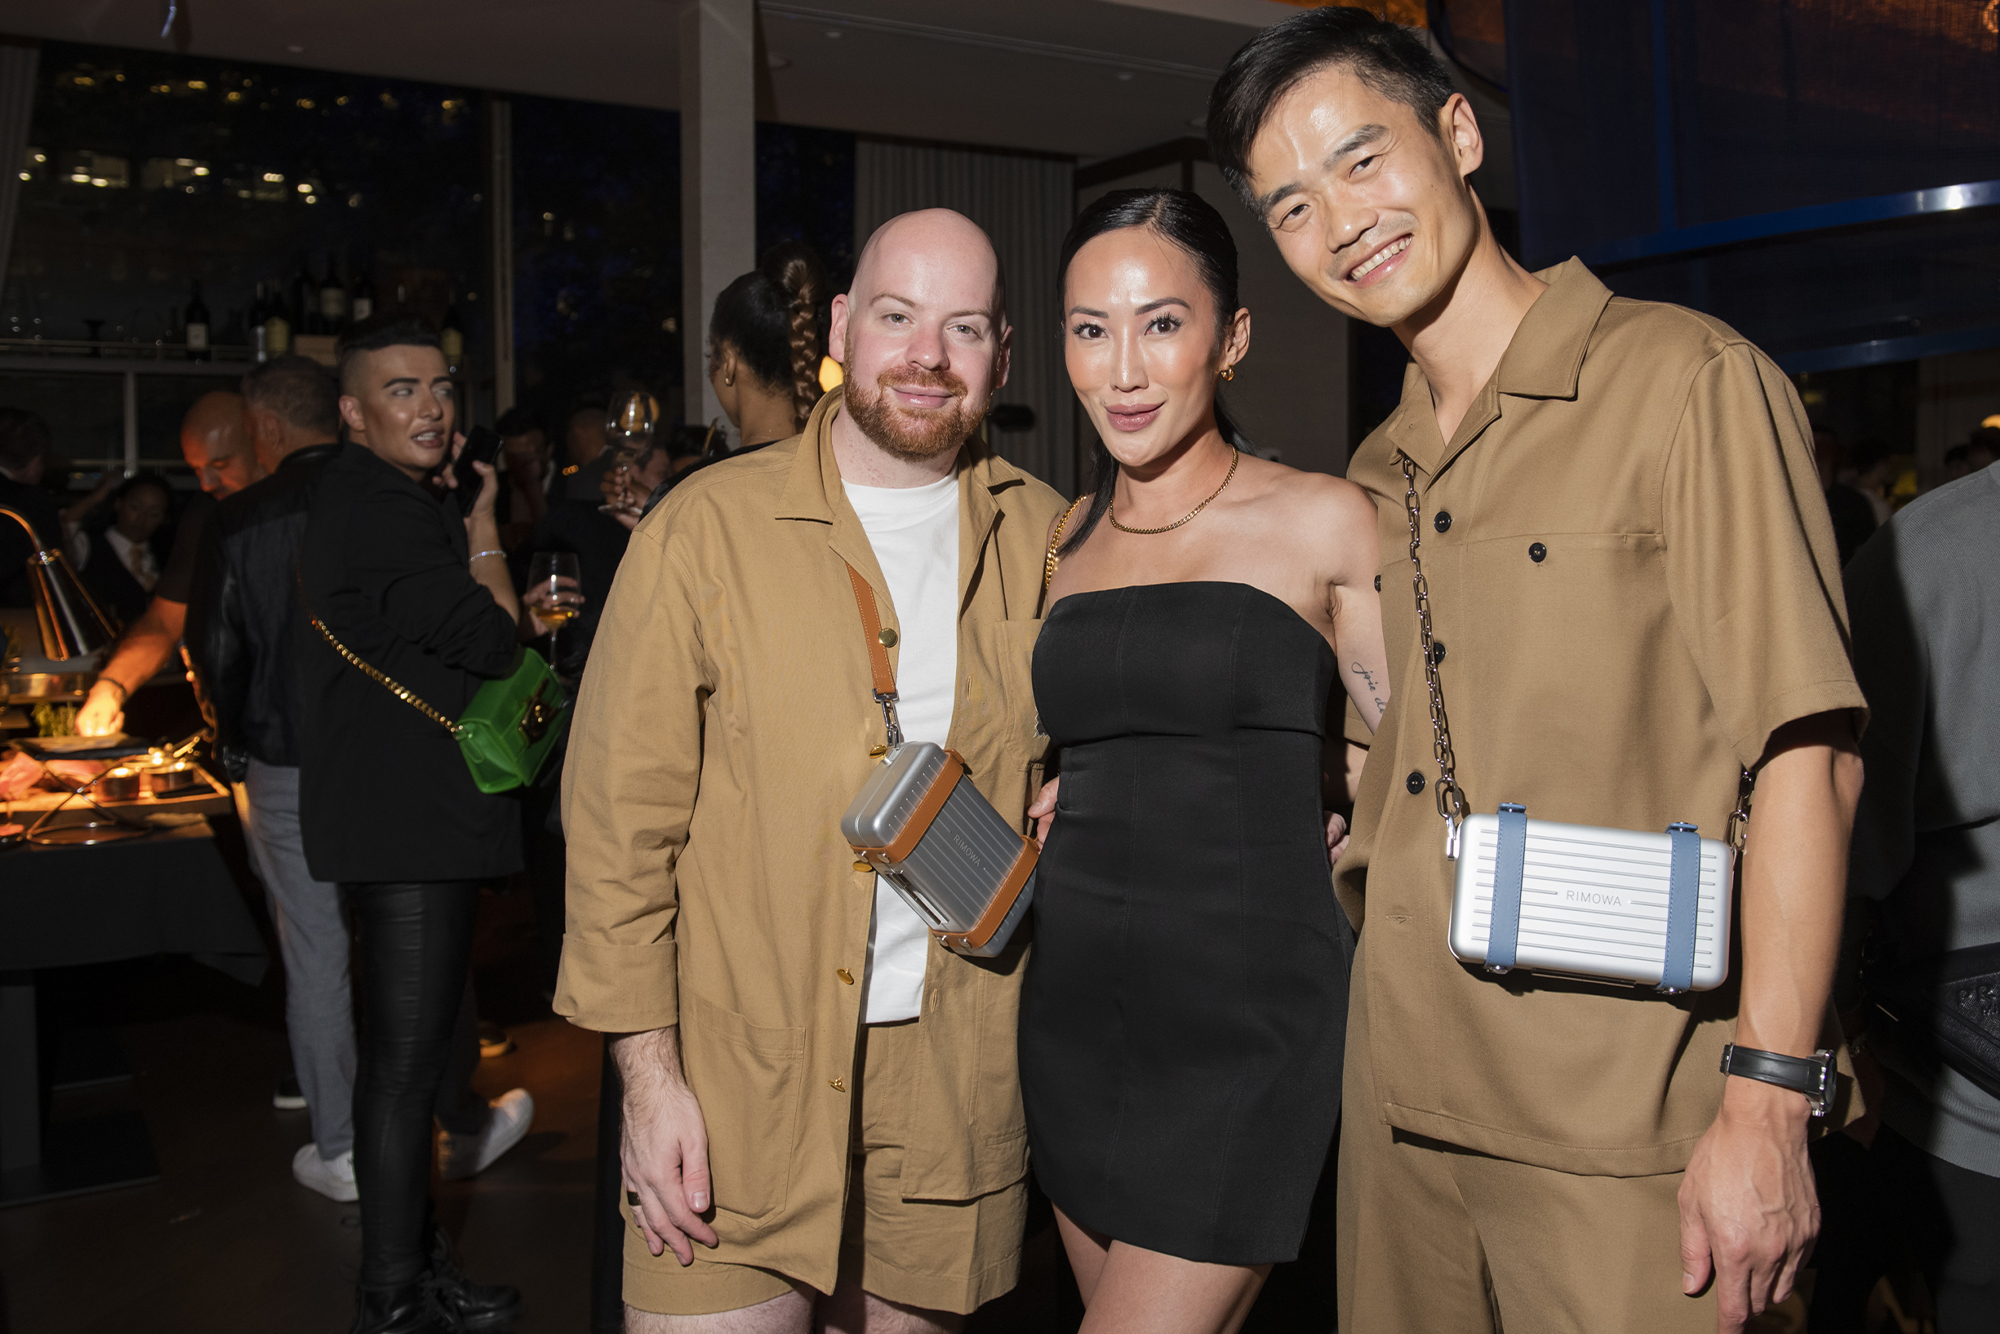 Three guests pose for Bad Boy Cobalt launch party at Black+Blue Toronto. Two men in beige outfits are on the right and left of a woman in a black dress.